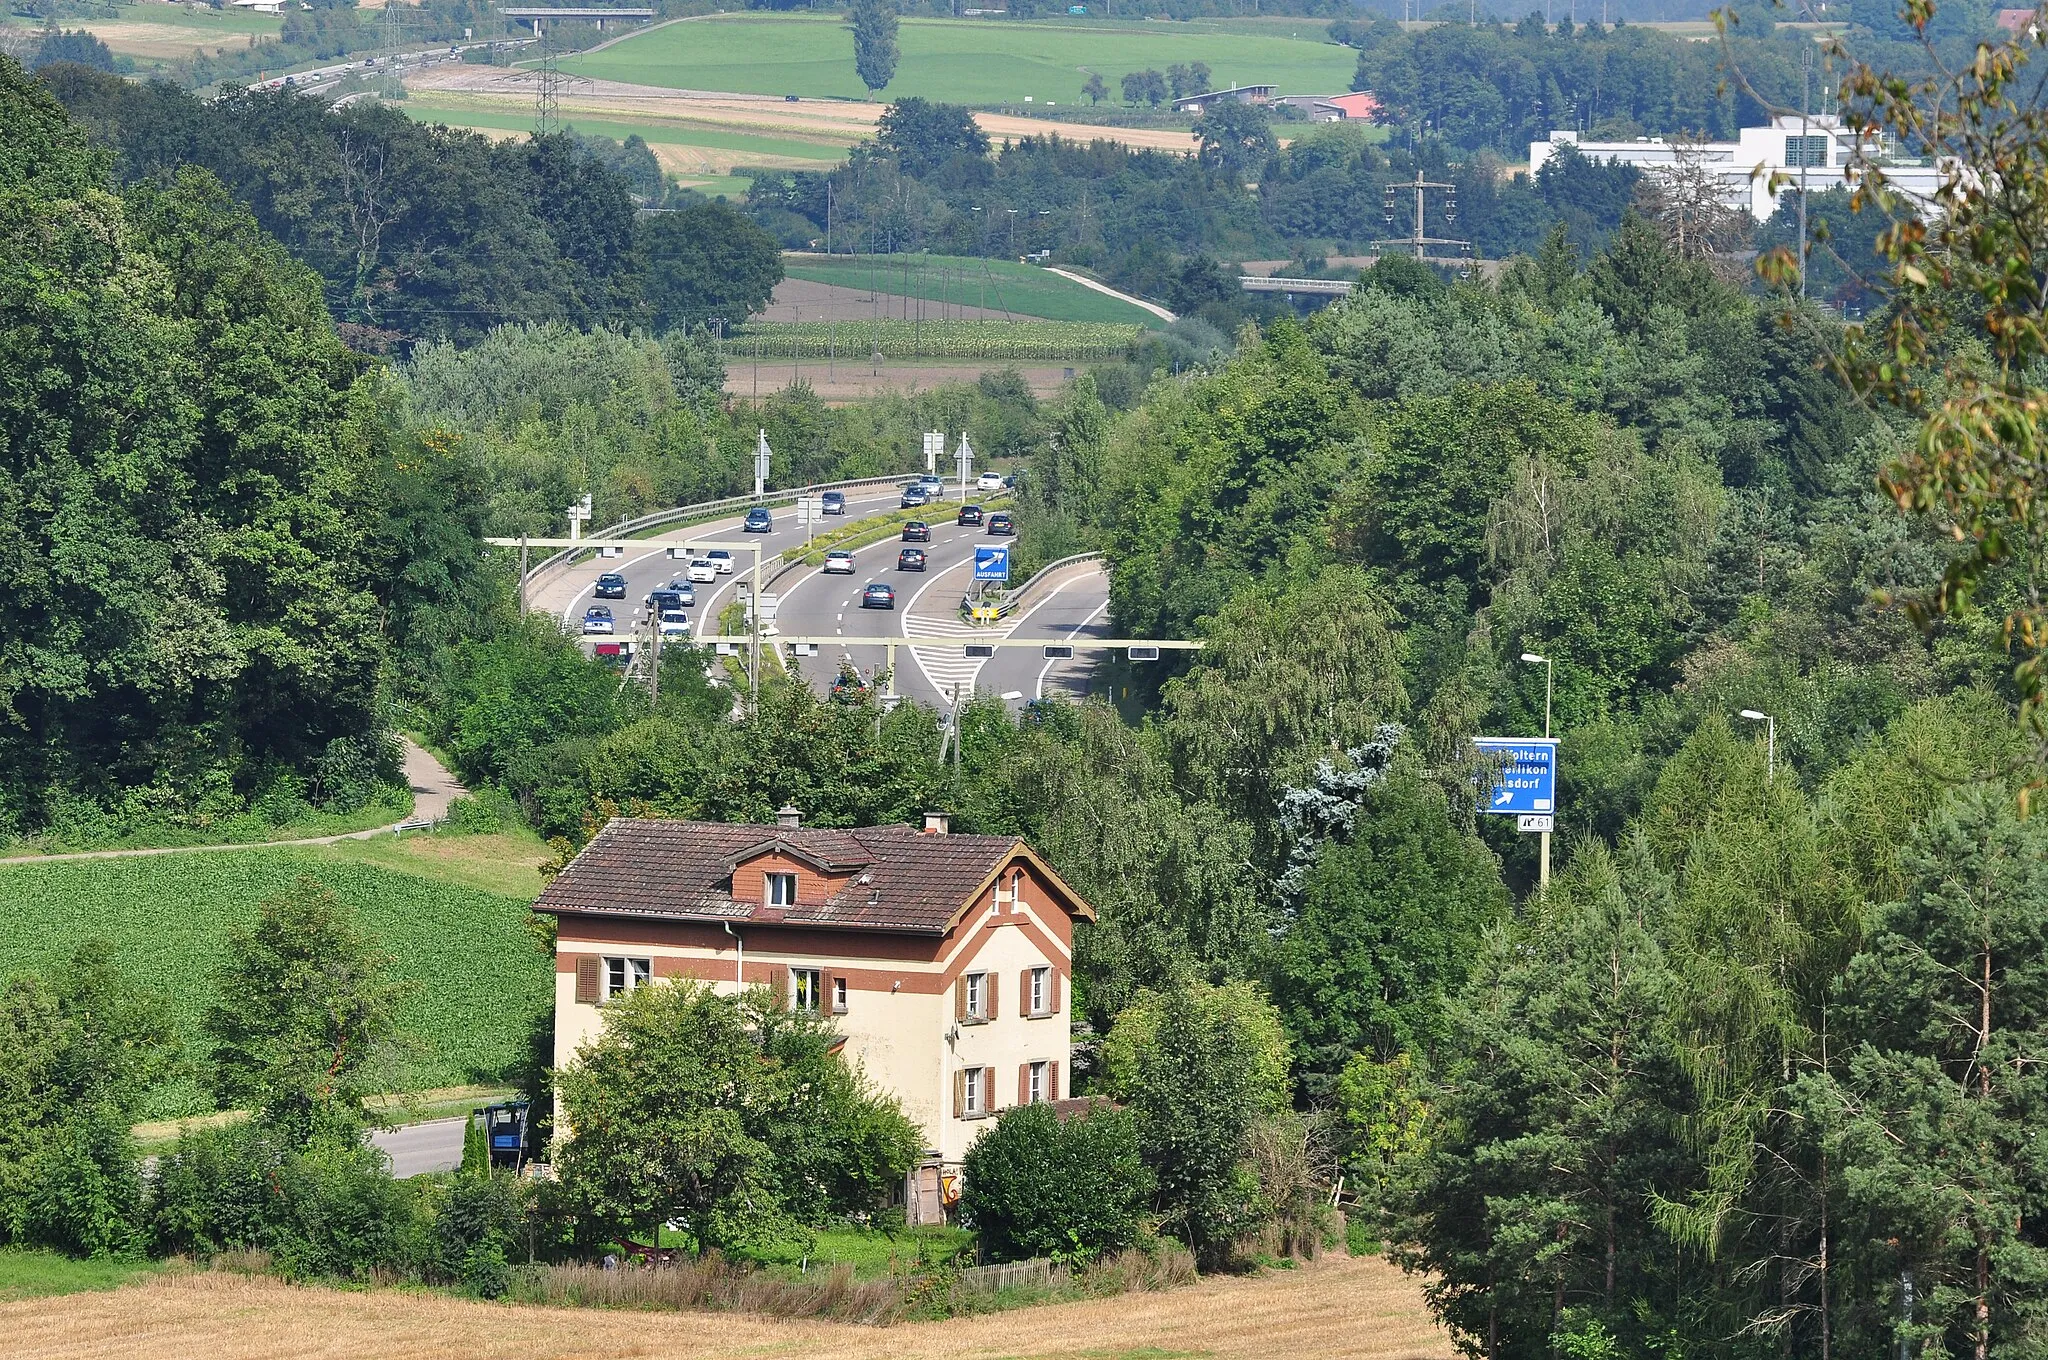 Photo showing: A1 between Zürich-Affoltern (to the right) and Rümlang, as seen from Geissberg in Regensdorf (Switzerland).